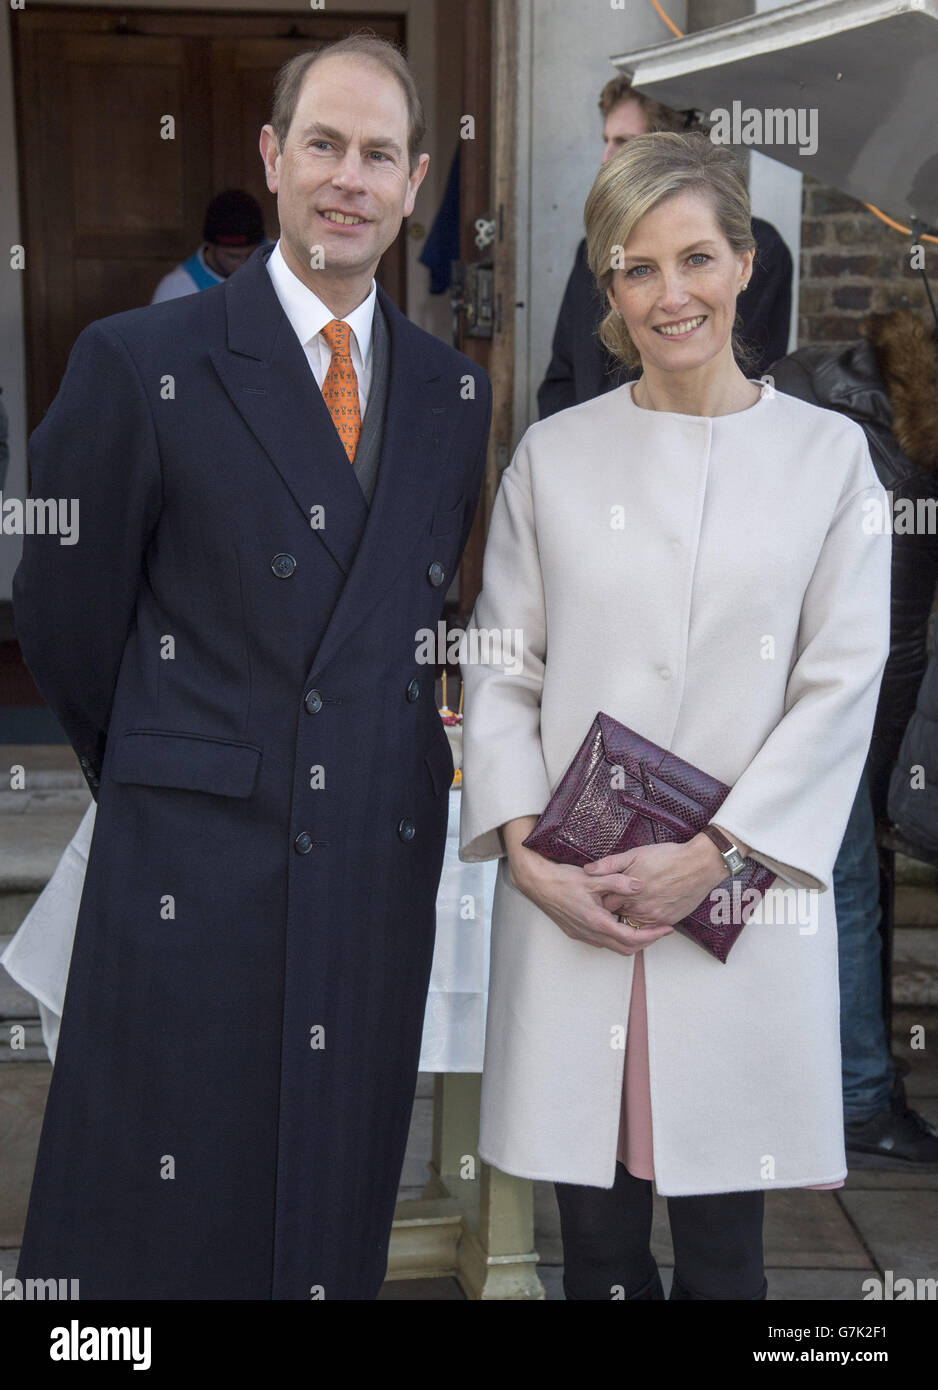 The Countess of Wessex accompanied by the Earl of Wessex visits the Tomorrow's People Social Enterprises, St Anselm's Church, Kennington to meet staff and supporters in support of The Queen's Diamond Jubilee Trust and Tomorrow's People, on the Countess' 50th birthday. Stock Photo